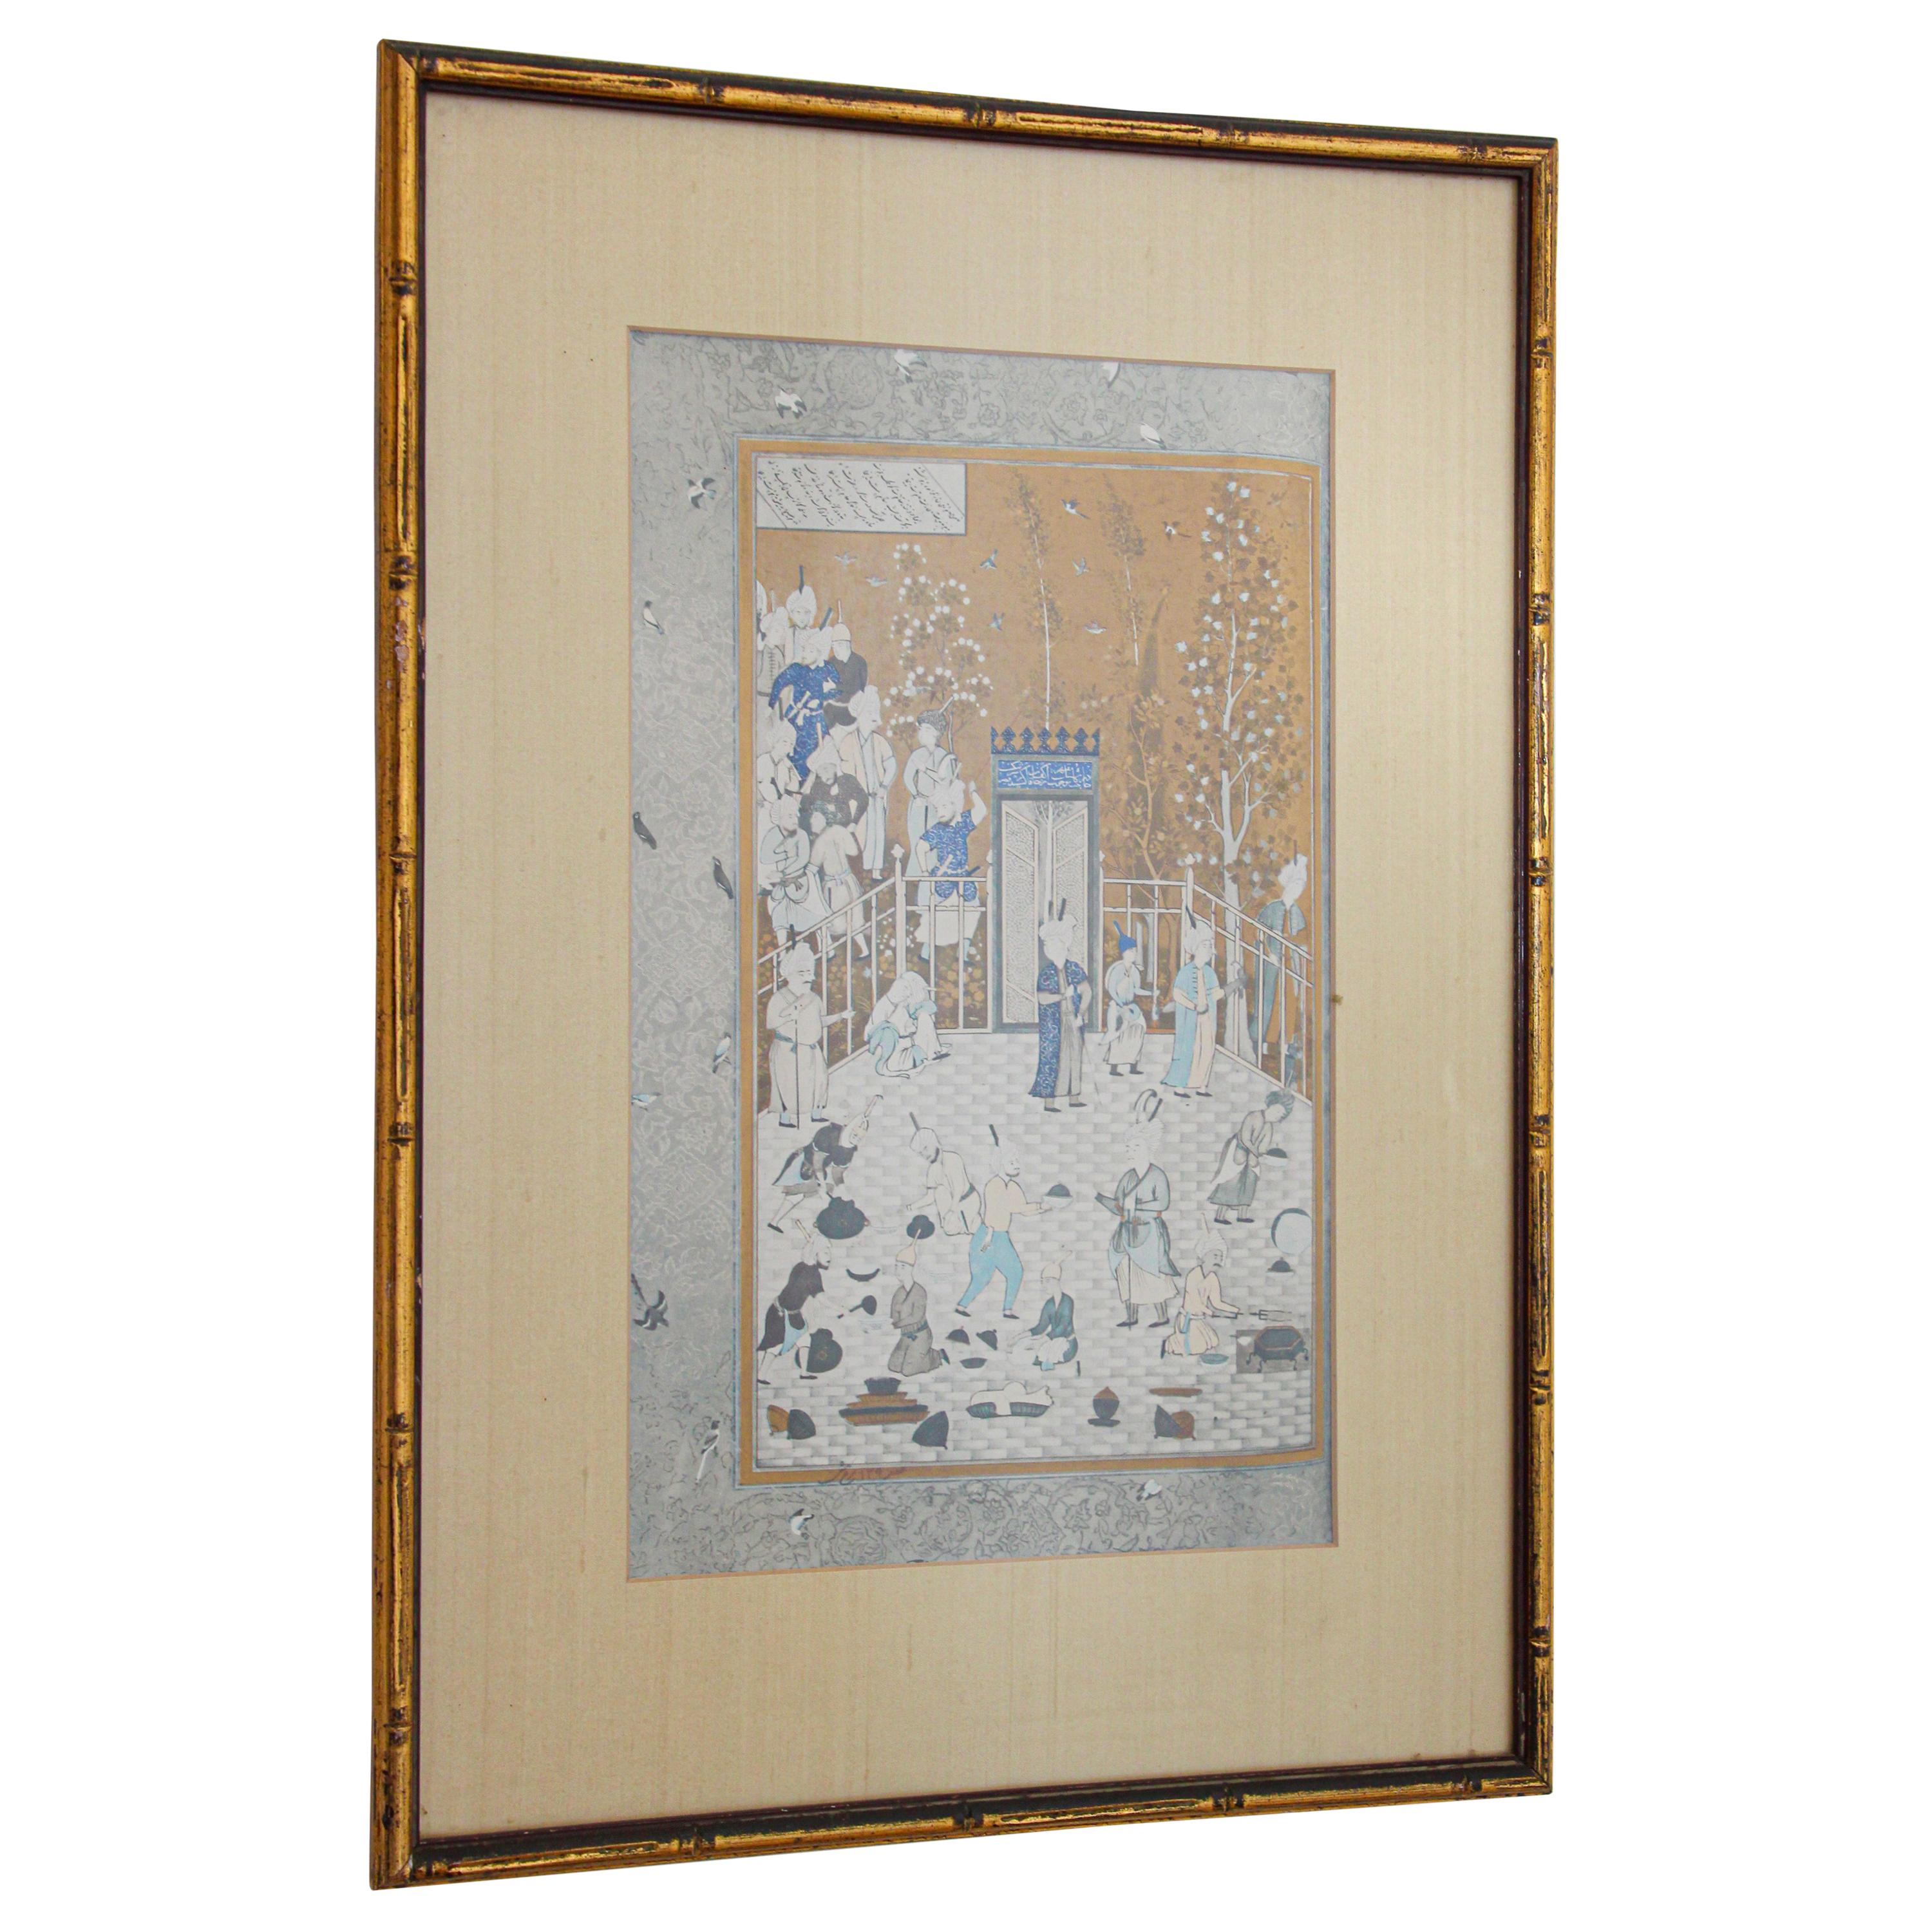 Mughal print after a 16th century Indian hand painting in wood gilt frame.
Indian Mughal School, illuminated 
India Rajasthan Indian Mughal School, illuminated print, well framed.
Faded print watercolor.
Size: 20.5